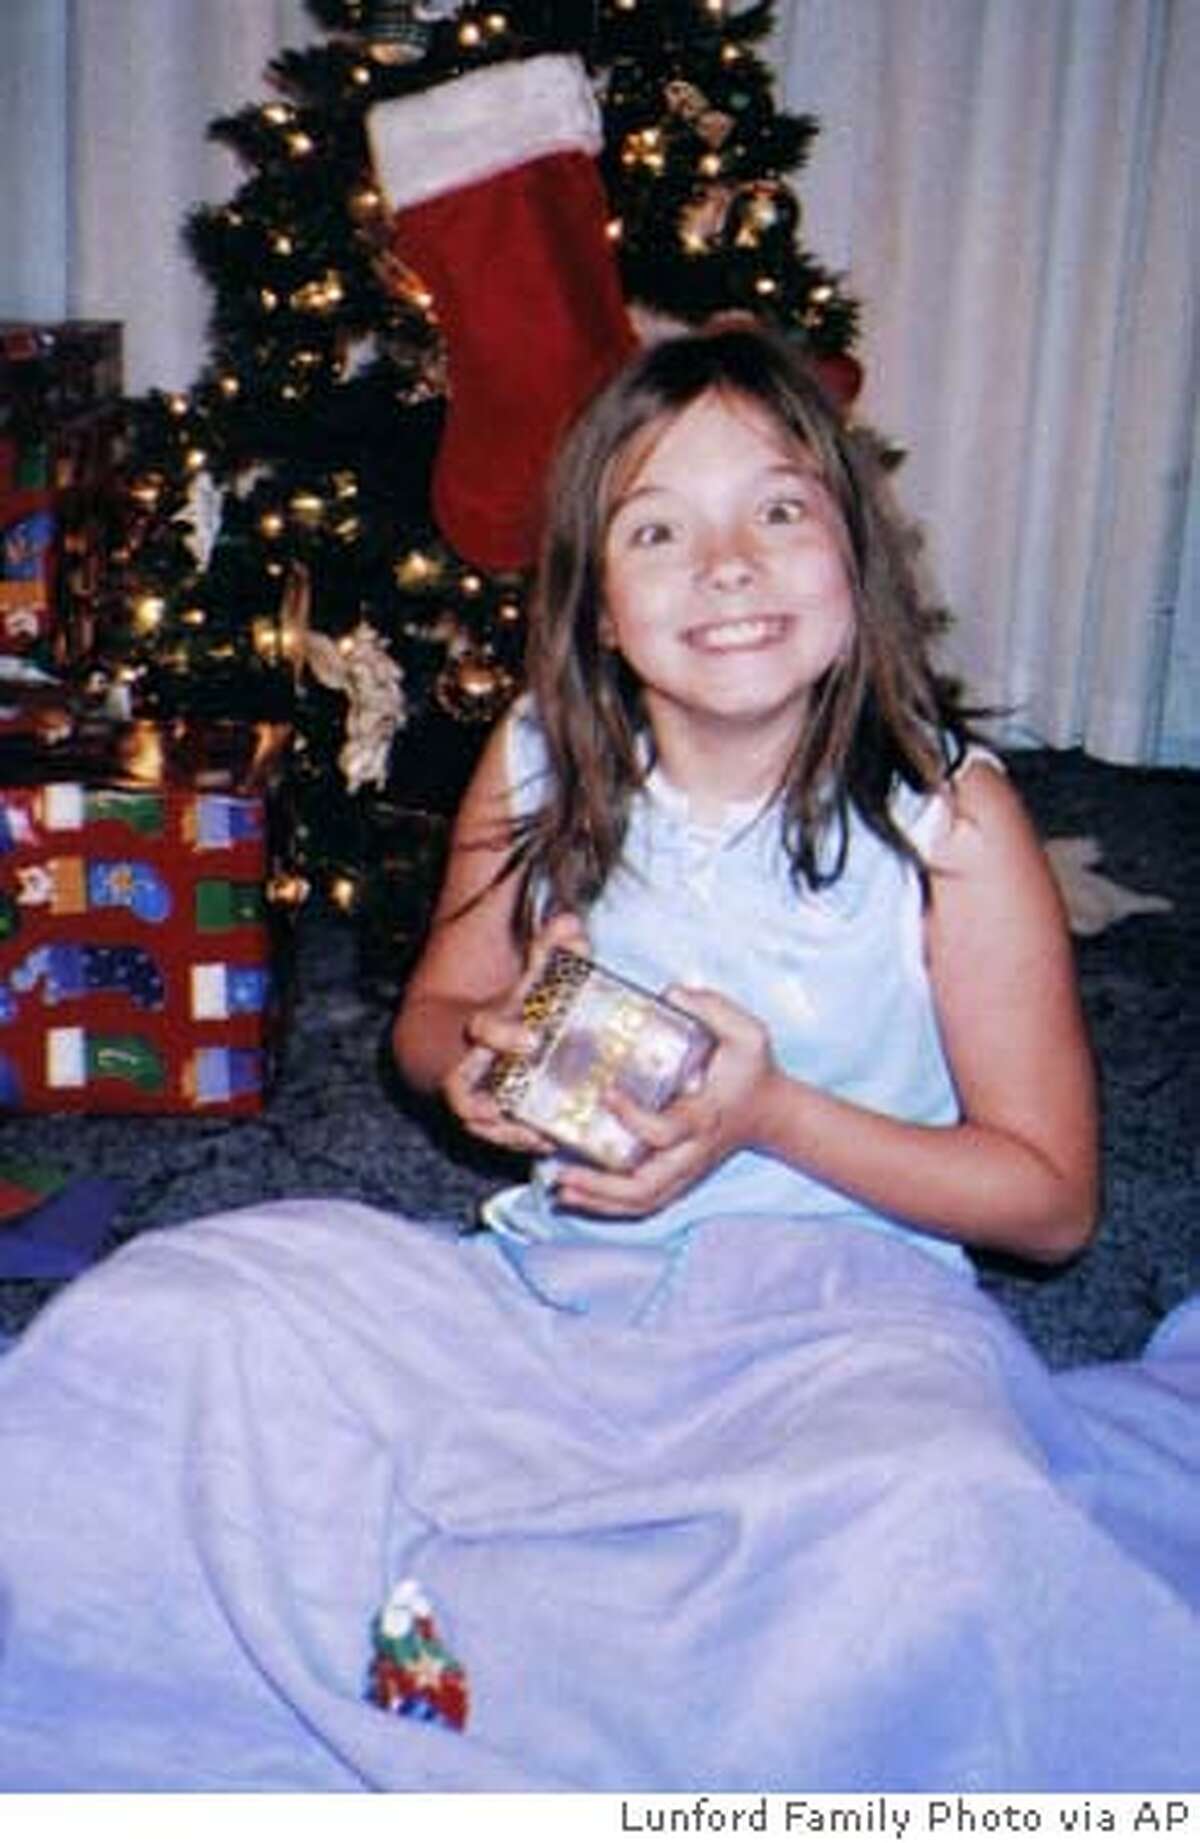 Jessica Lunsford, shown in this Dec. 25, 2004 photo released by the Lunsford Family. John Evander Couey, a registered sex offender, has admitted kidnapping Lunsford, a 9-year-old Florida girl from her bedroom last month and killing her, authorities said Friday, March 18, 2005. (AP Photo/Lunford Family Photo) Ran on: 03-19-2005 John Evander Couey